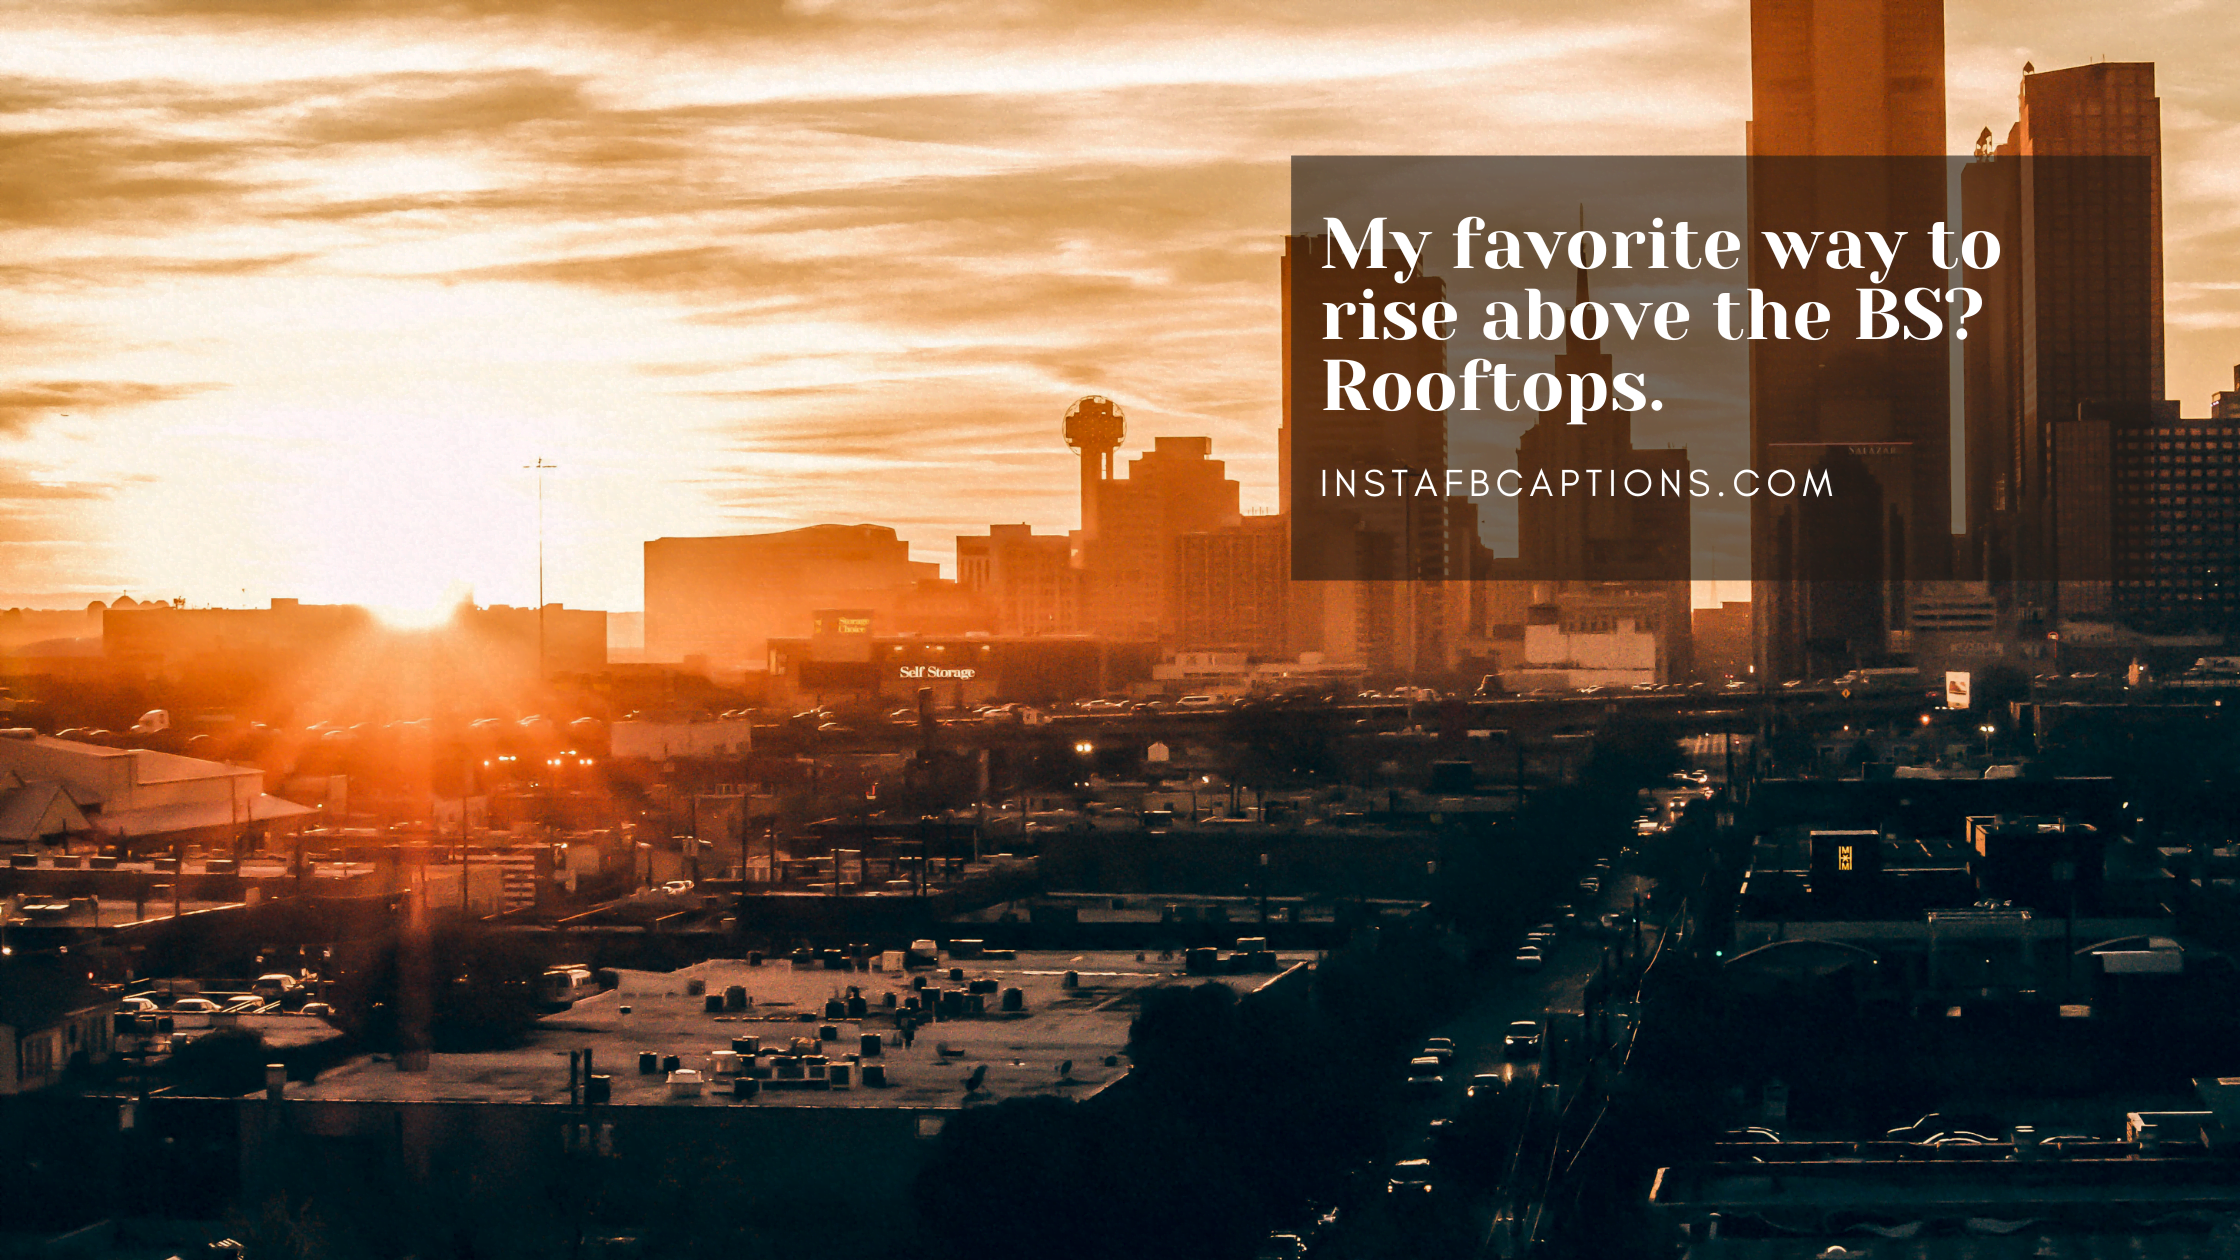 Funny Rooftop Captions  - Funny Rooftop Captions - 99 Rooftop Instagram Captions for Height View in 2023